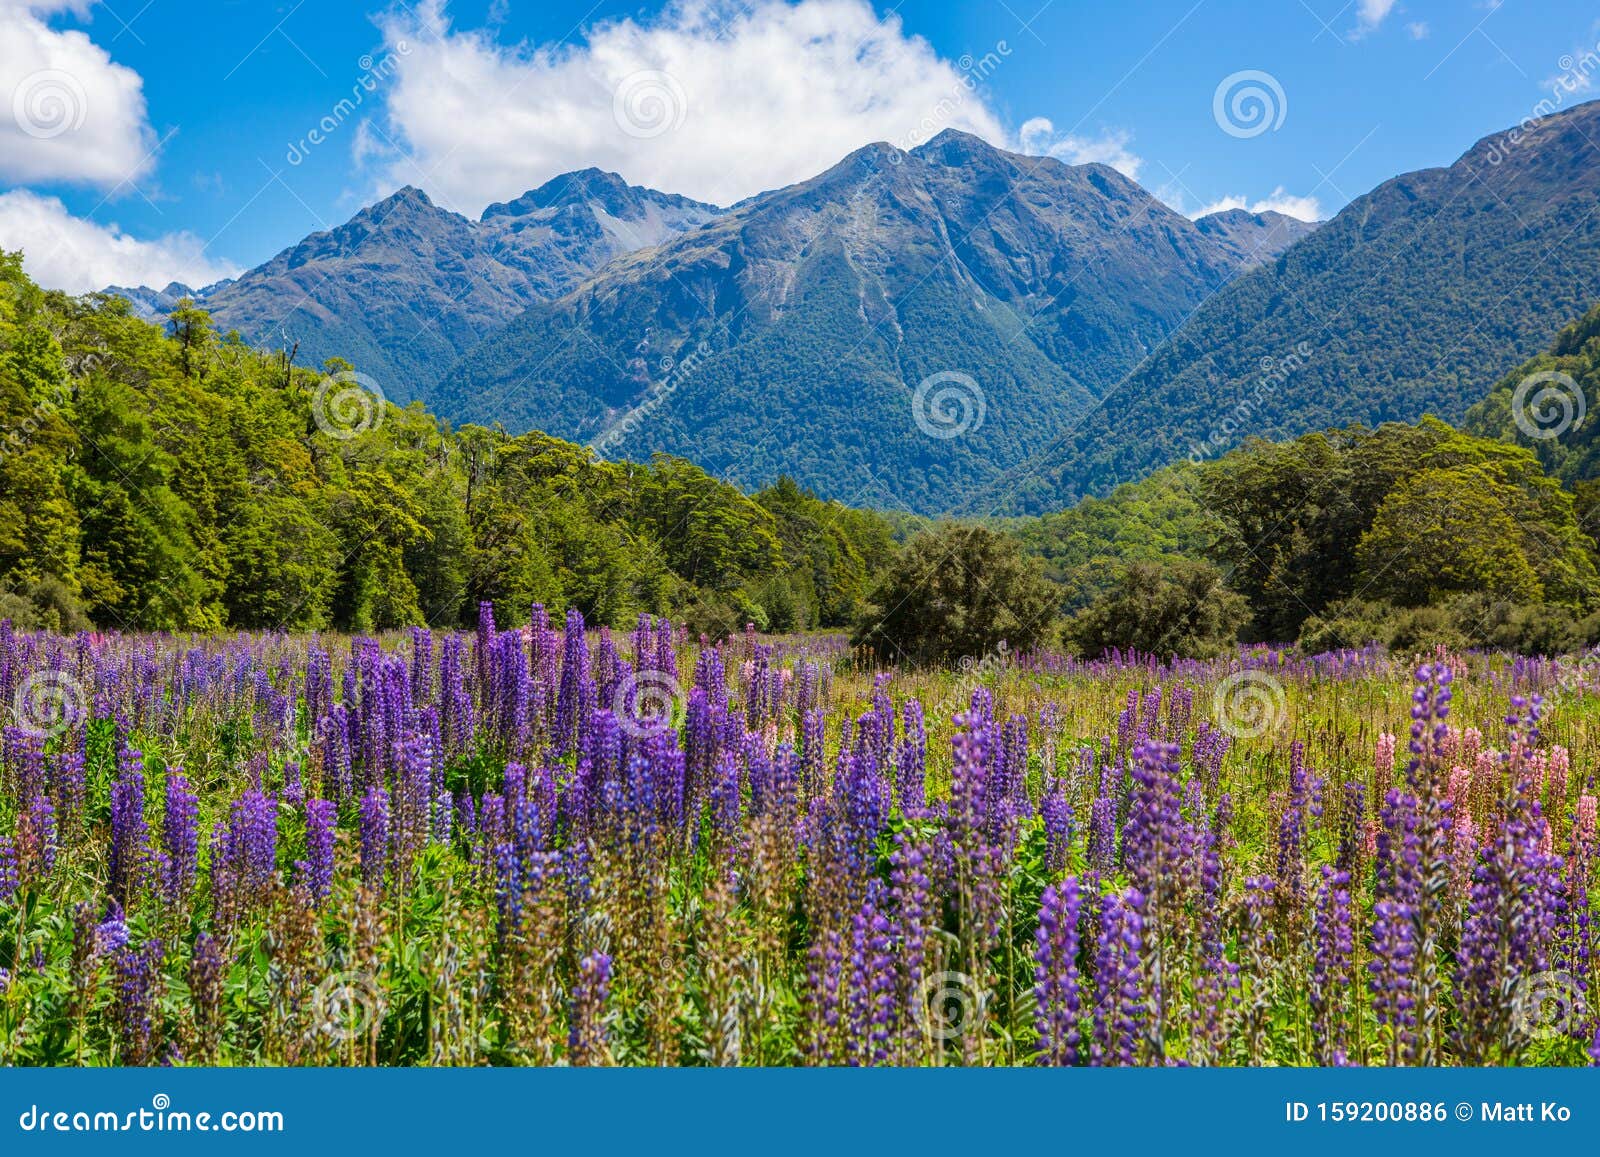 11,024 Flower Base Stock Photos - Free & Royalty-Free Stock Photos from  Dreamstime